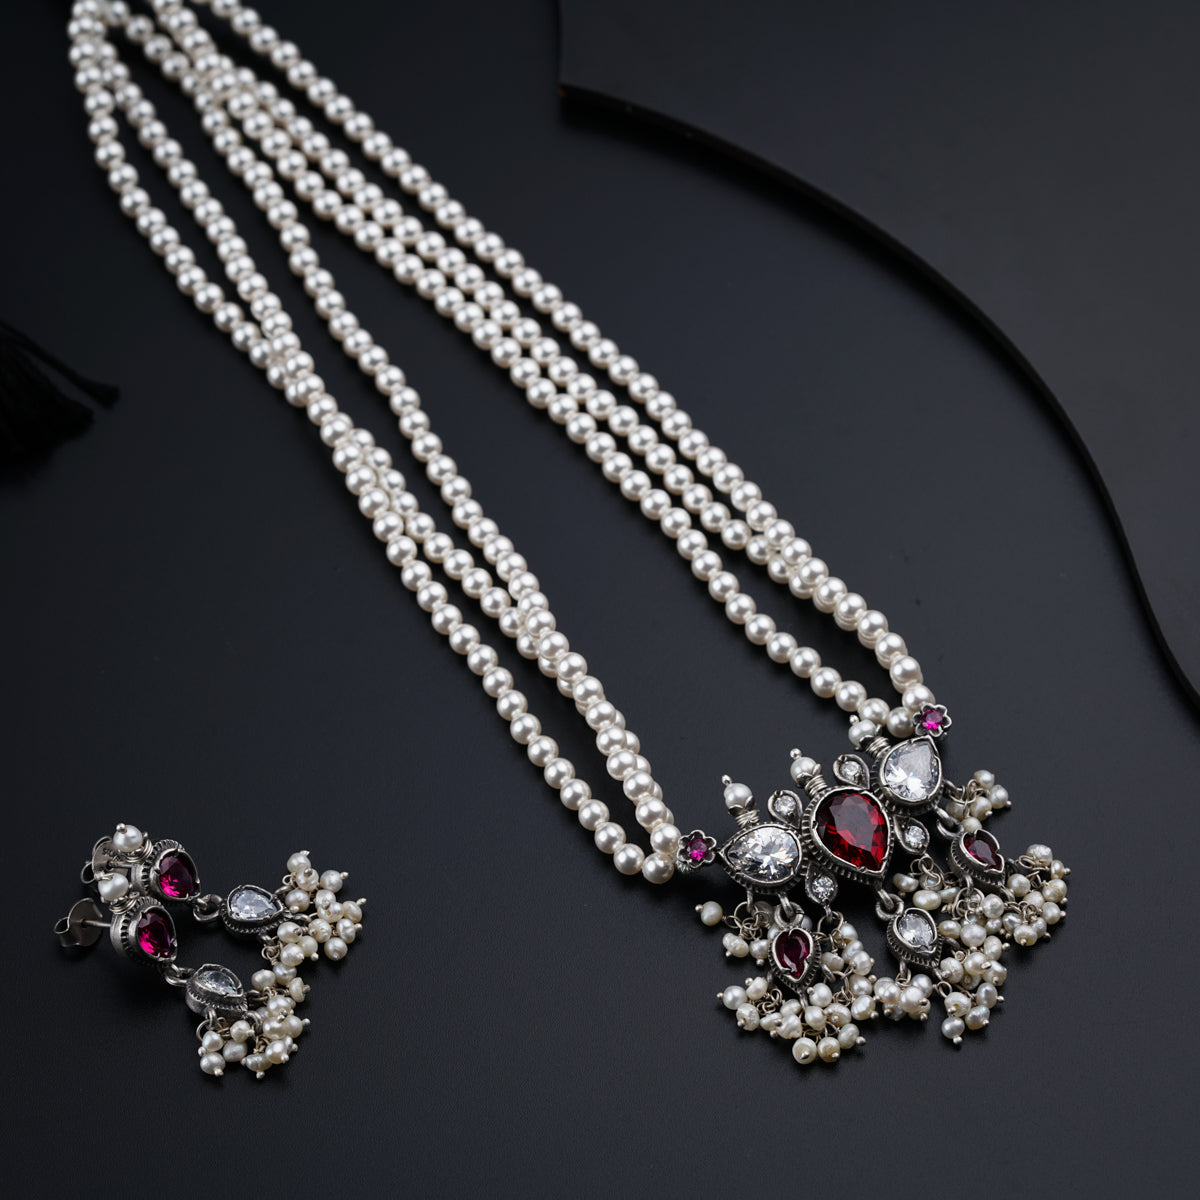 Tanmani Set with High Quality Pearls